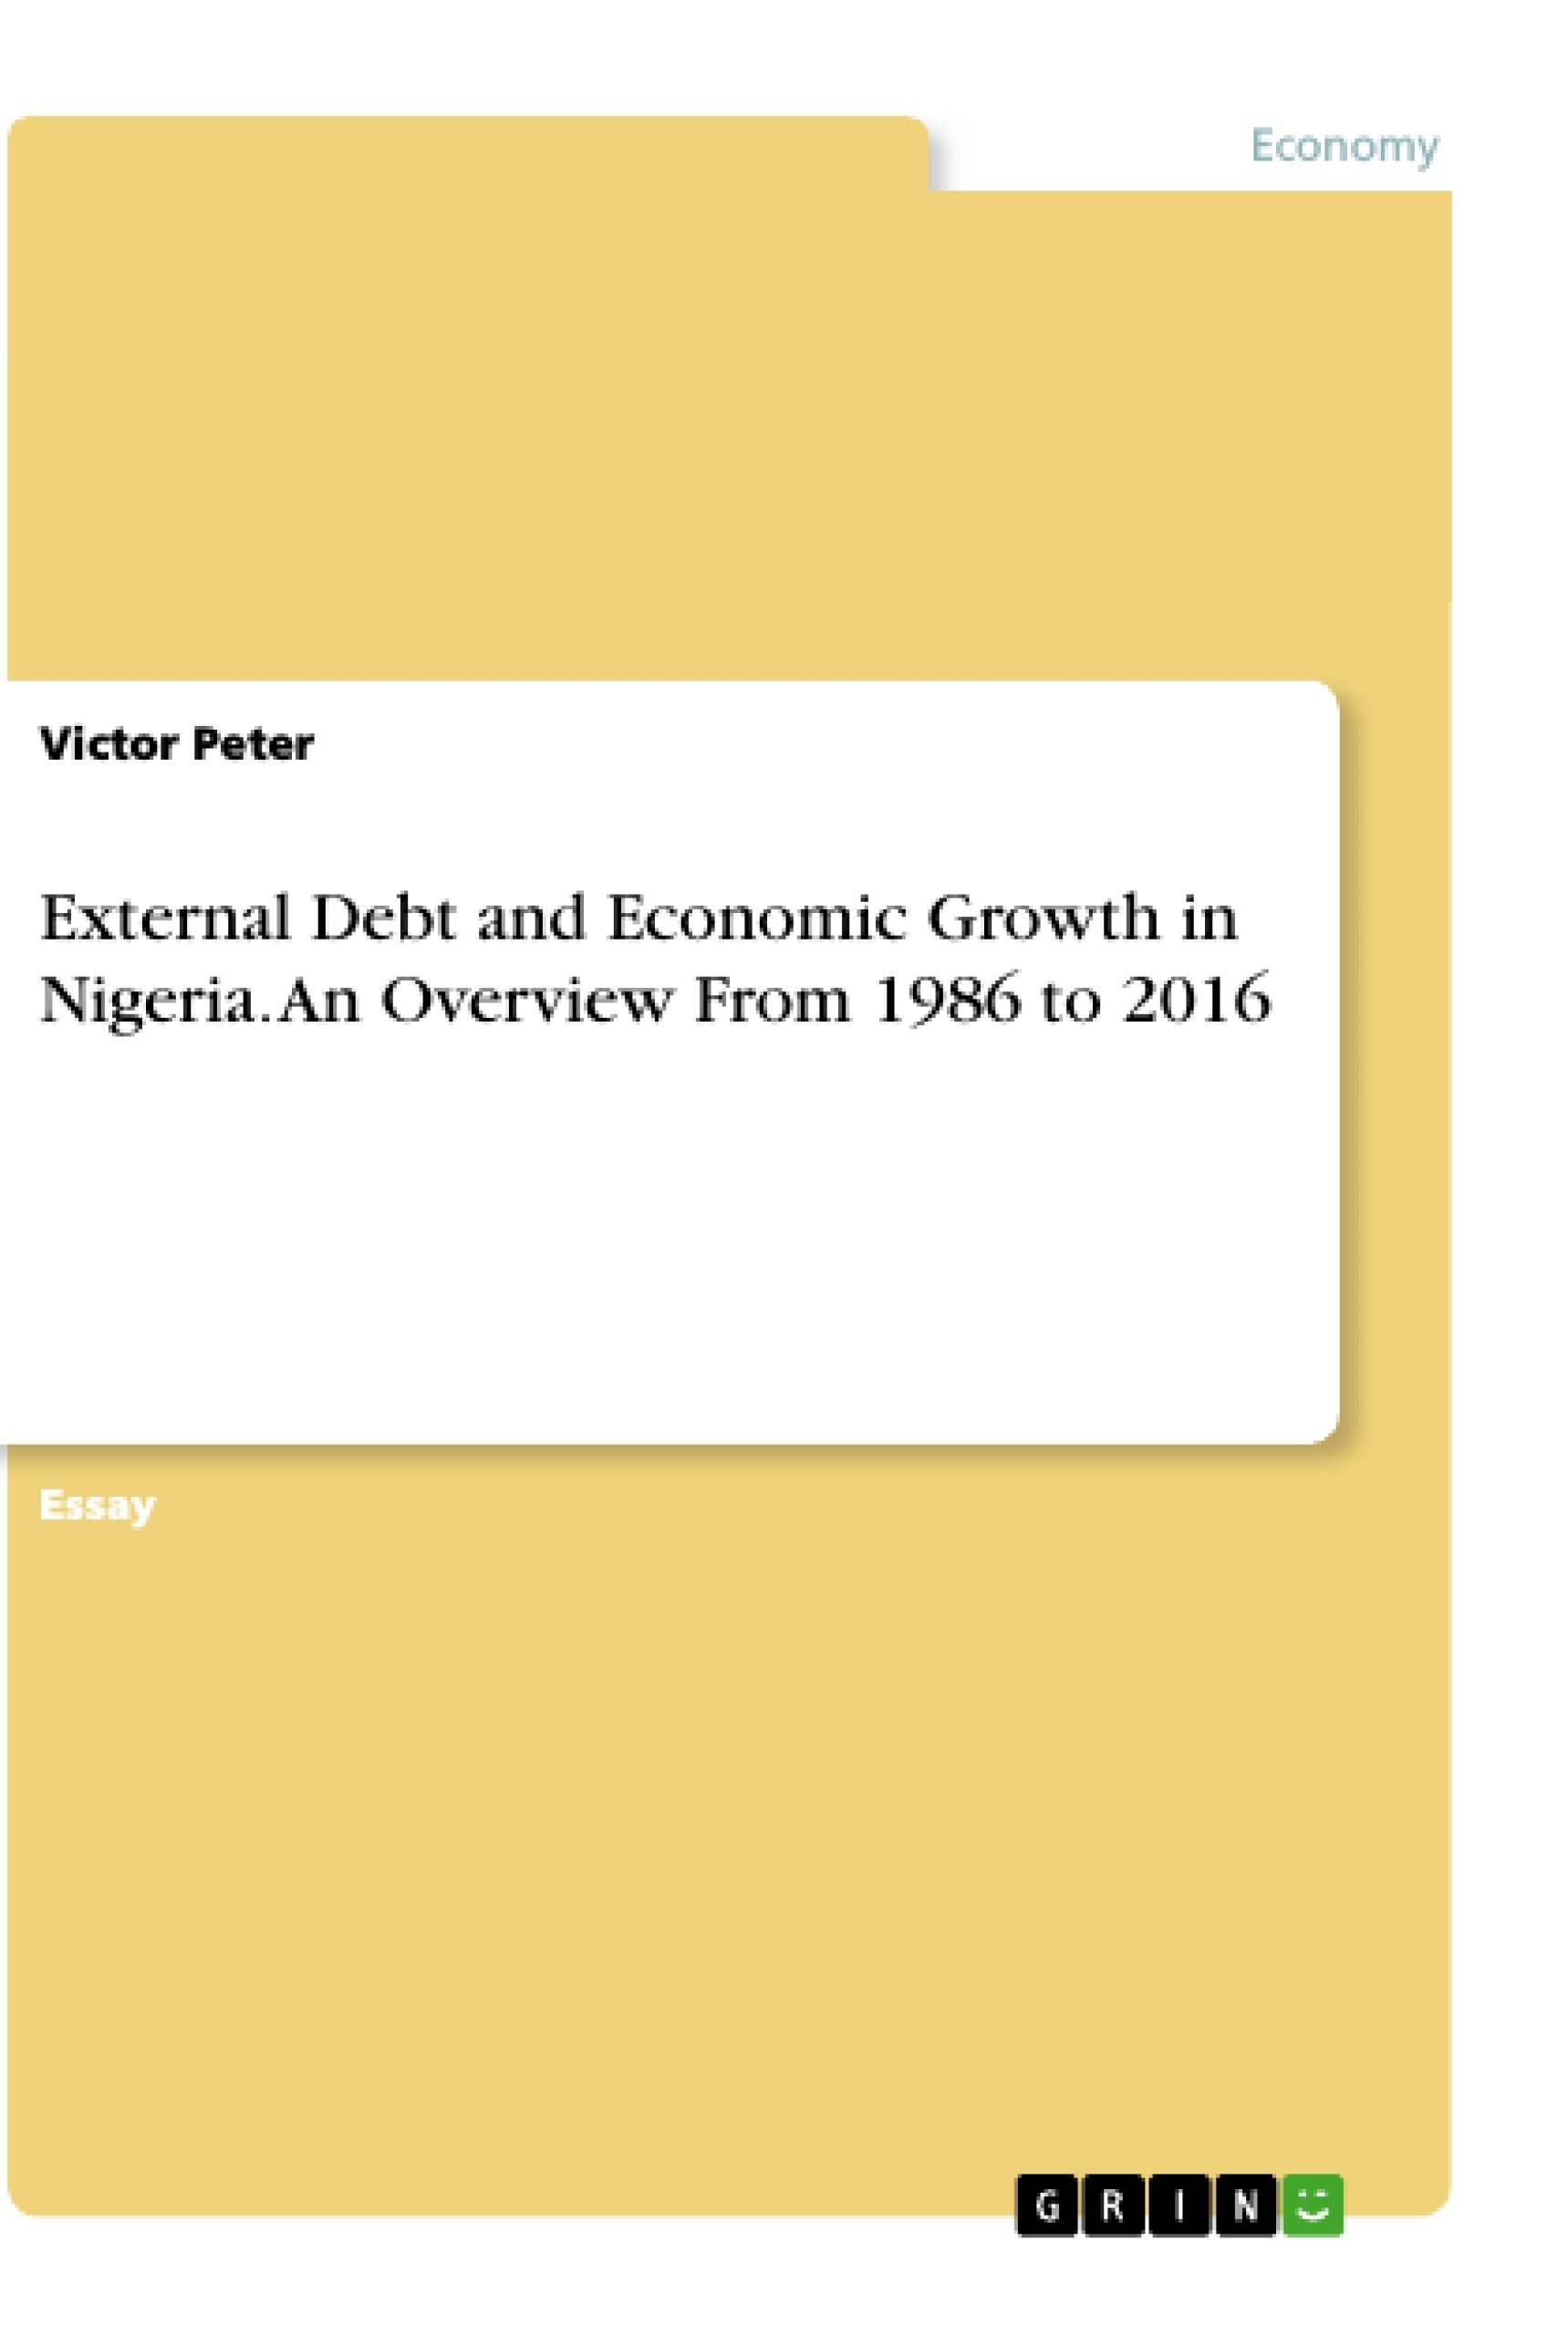 Title: External Debt and Economic Growth in Nigeria. An Overview From 1986 to 2016